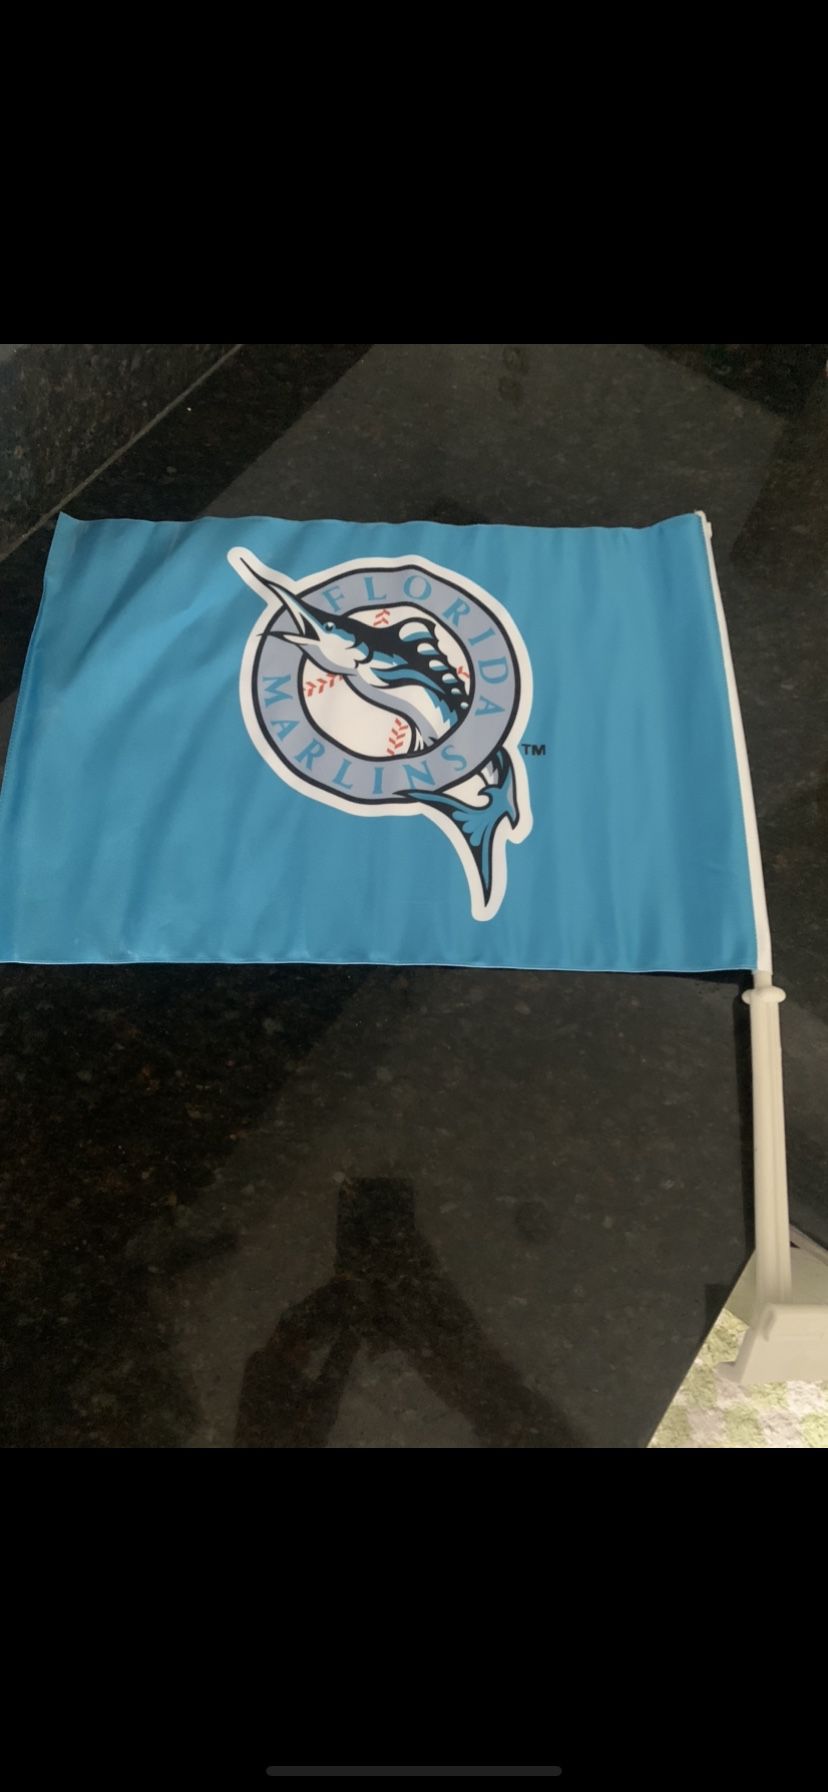 Car Flags New All Different Teams And Sayings  $6 Each 